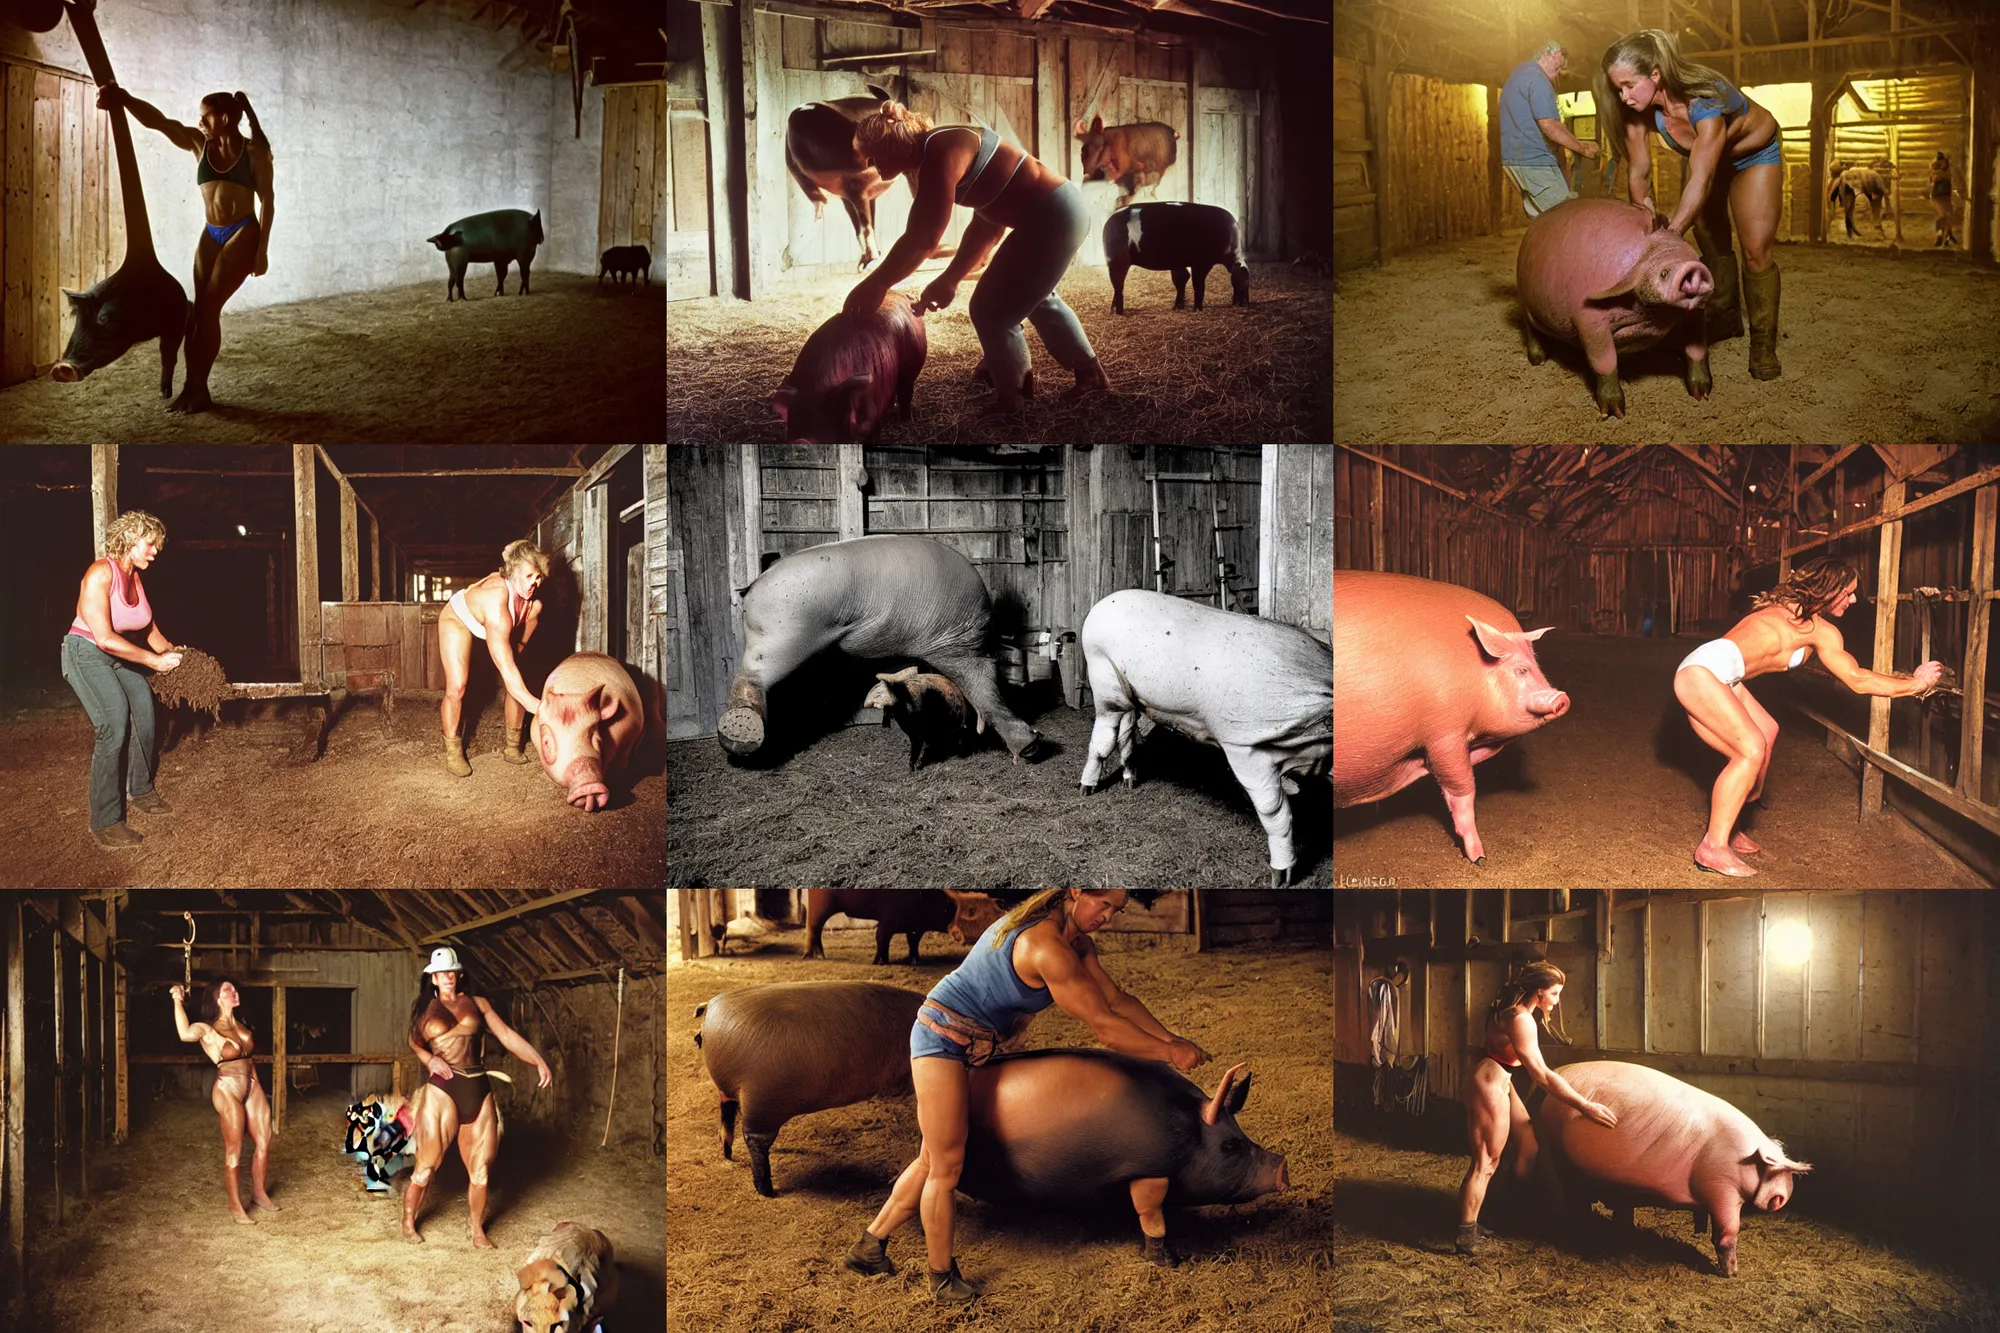 Prompt: color photograph portrait of a muscular woman tending a large pig in a dirty barn, night, summer, warm lighting, 1 9 9 0 photographs from life magazine.